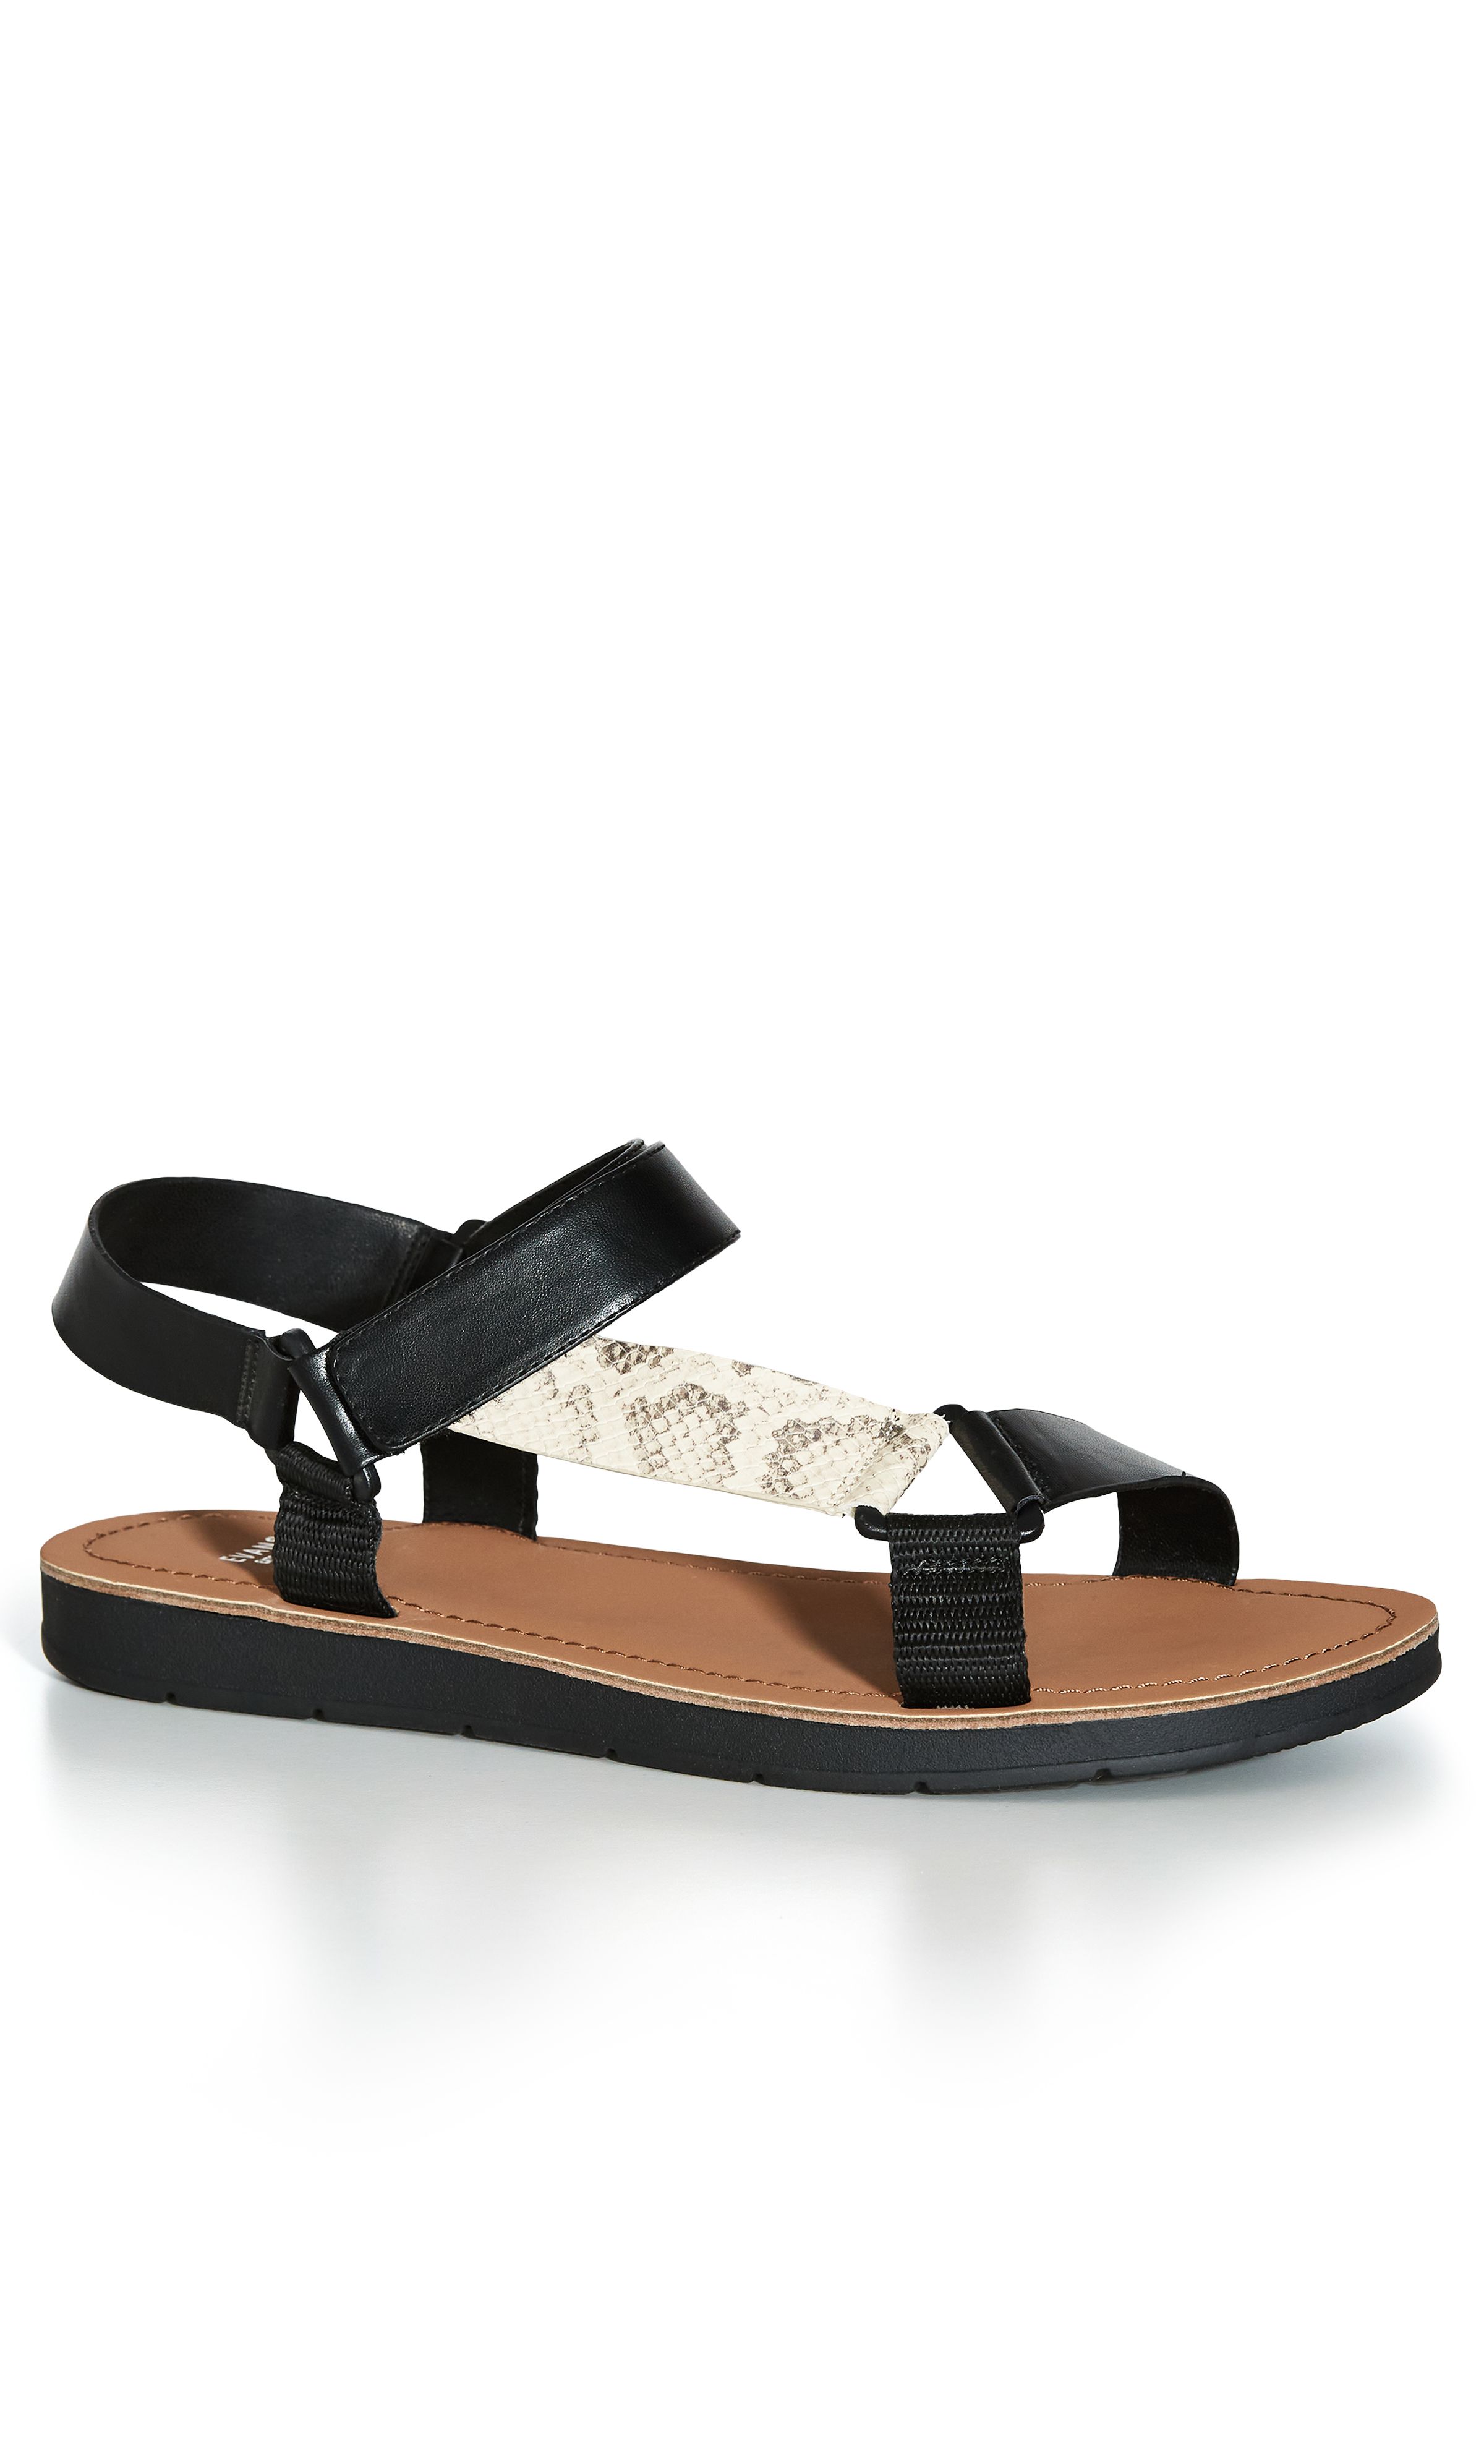 Keep on-trend this summer in the chunky stylings of our Snake Sporty Strap Sandal! Featuring an easy velcro closure and extra wide fit, these shoes are a seamless balance of comfort and style. Key Features Include: - Round open toe - Thick strapping - Velcro closure - Thick cushioned sole Upstyle with a flirty wrap dress and cute underarm bag.